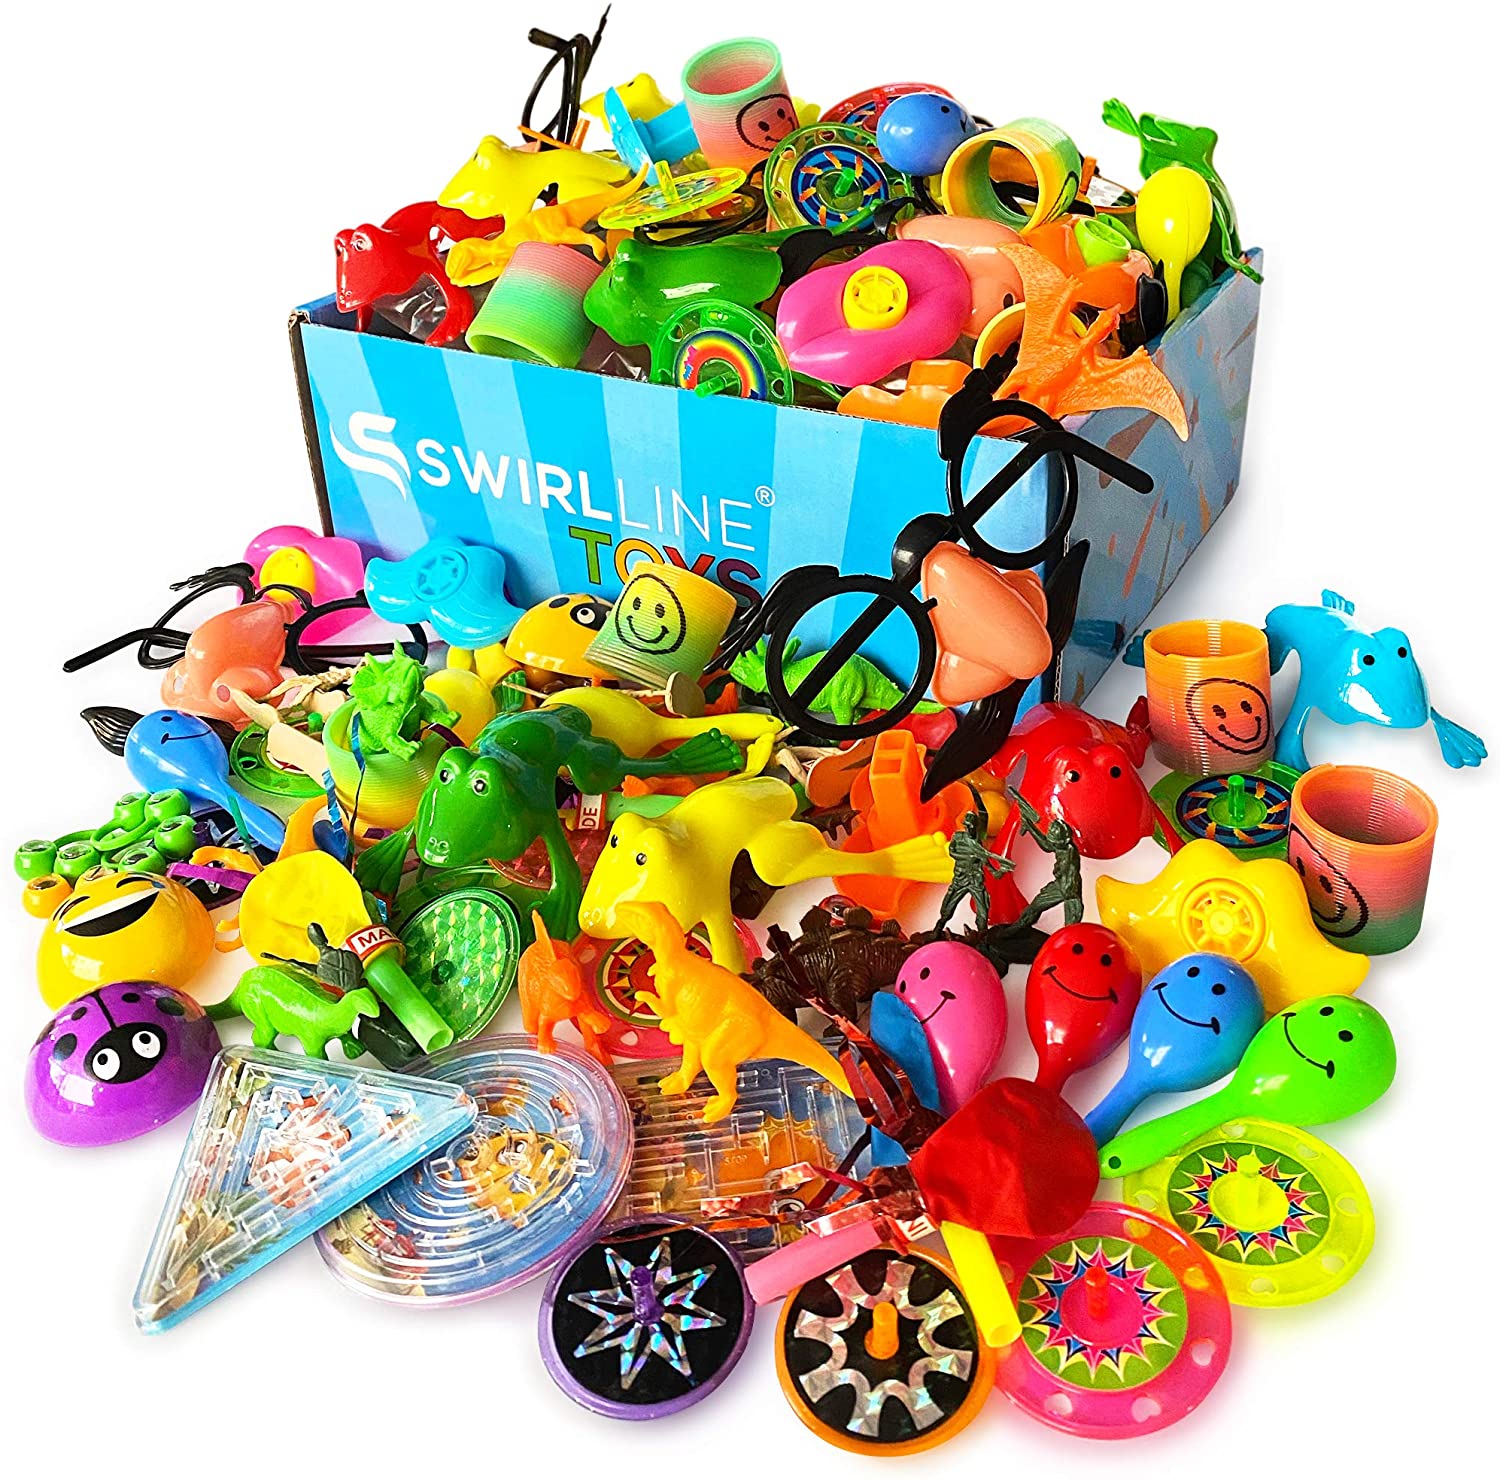 Bulk Toys Treasure Box Party Favors For Kids Pinata Fillers Birthday Party Gift Party Favor Toy Assortment 120 Pack Carnival Prizes Bulk Toys Goodie Bag Fillers Toys School Classroom Rewards 